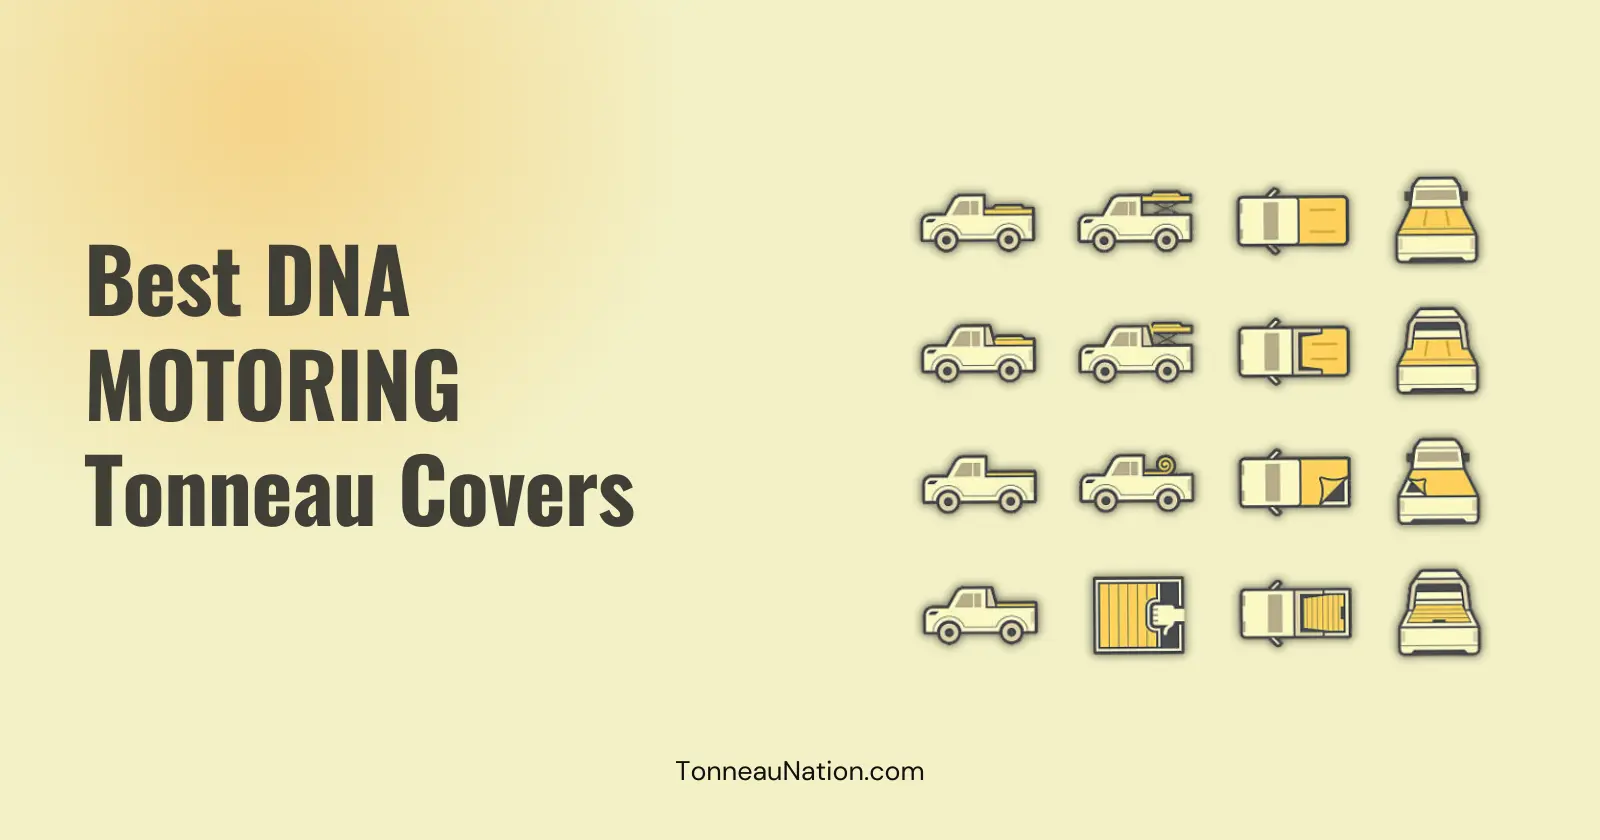 Tonneau cover from DNA MOTORING brand